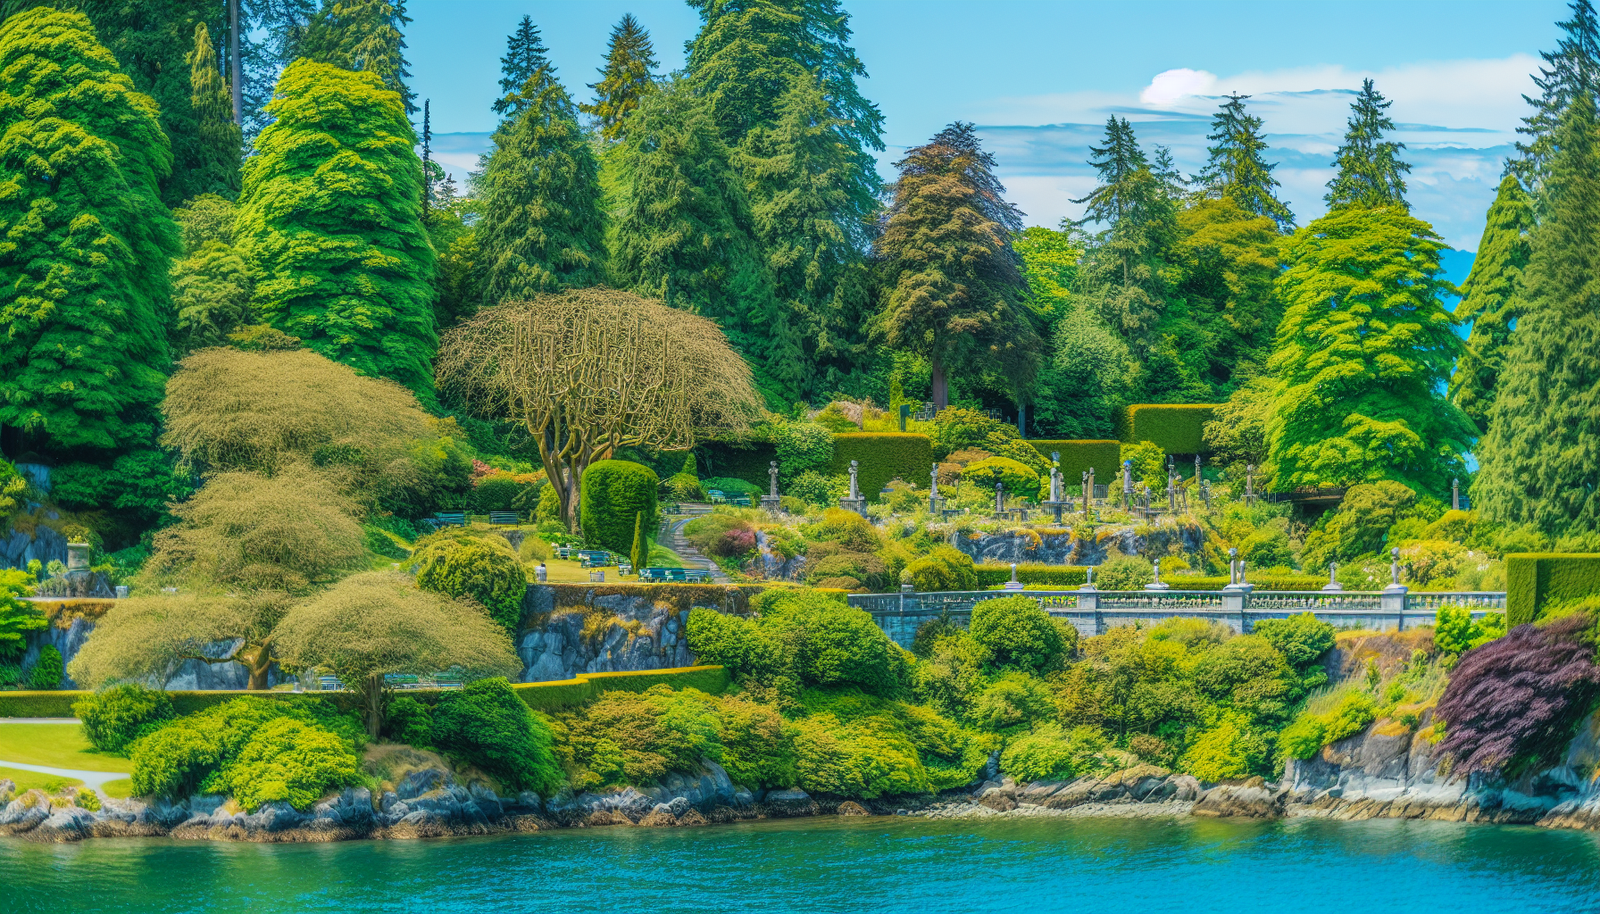 Scenic view of Stanley Park with lush greenery and the ocean: Vancouver Tourist Spots